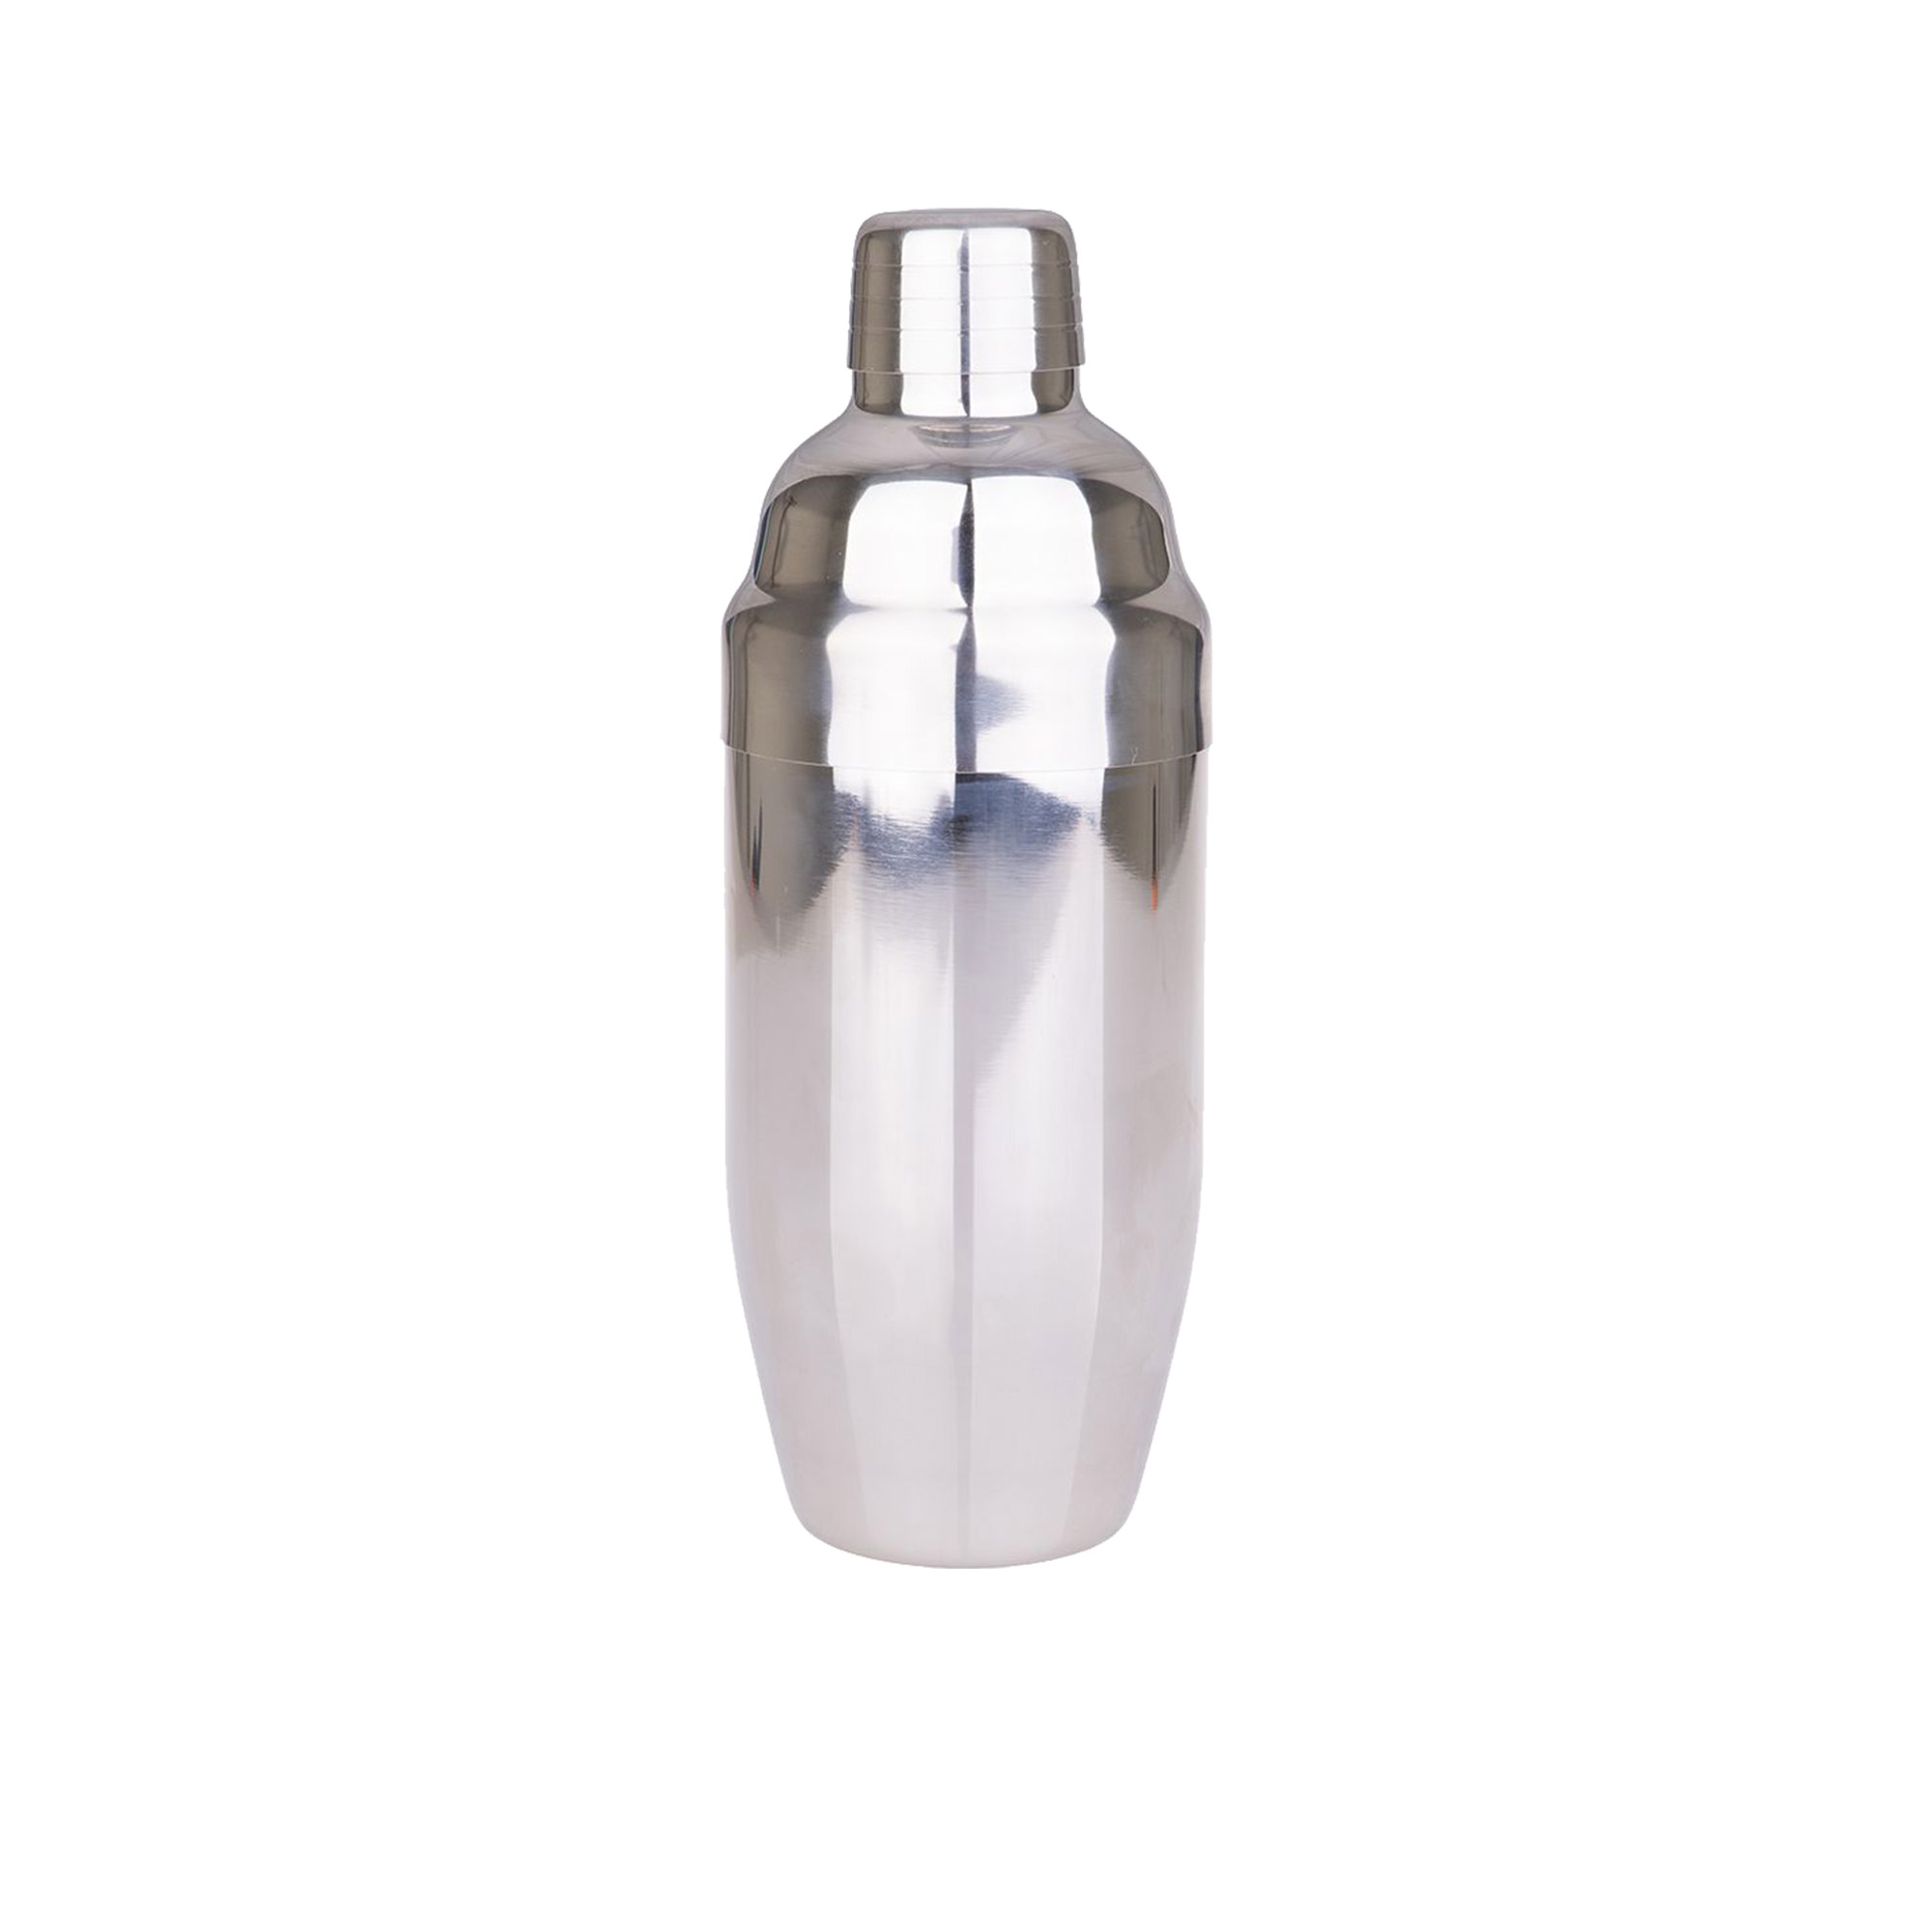 Bartender Stainless Steel Double Wall Cocktail Shaker 500ml Image 1